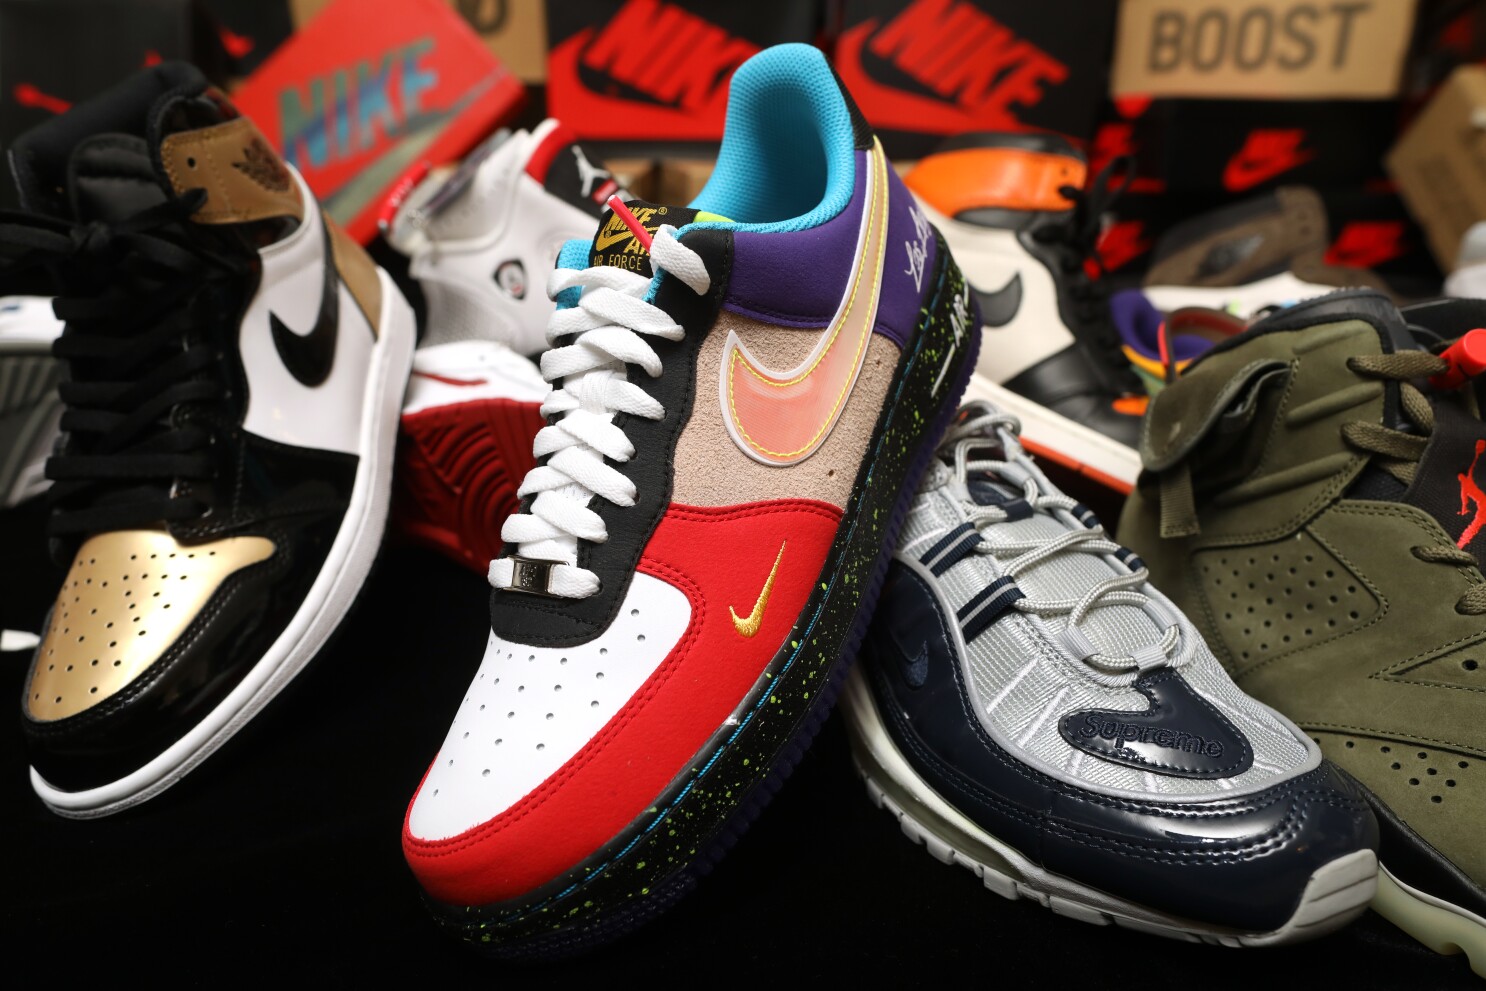 Options To Buy Nike Shoes In Local Stores